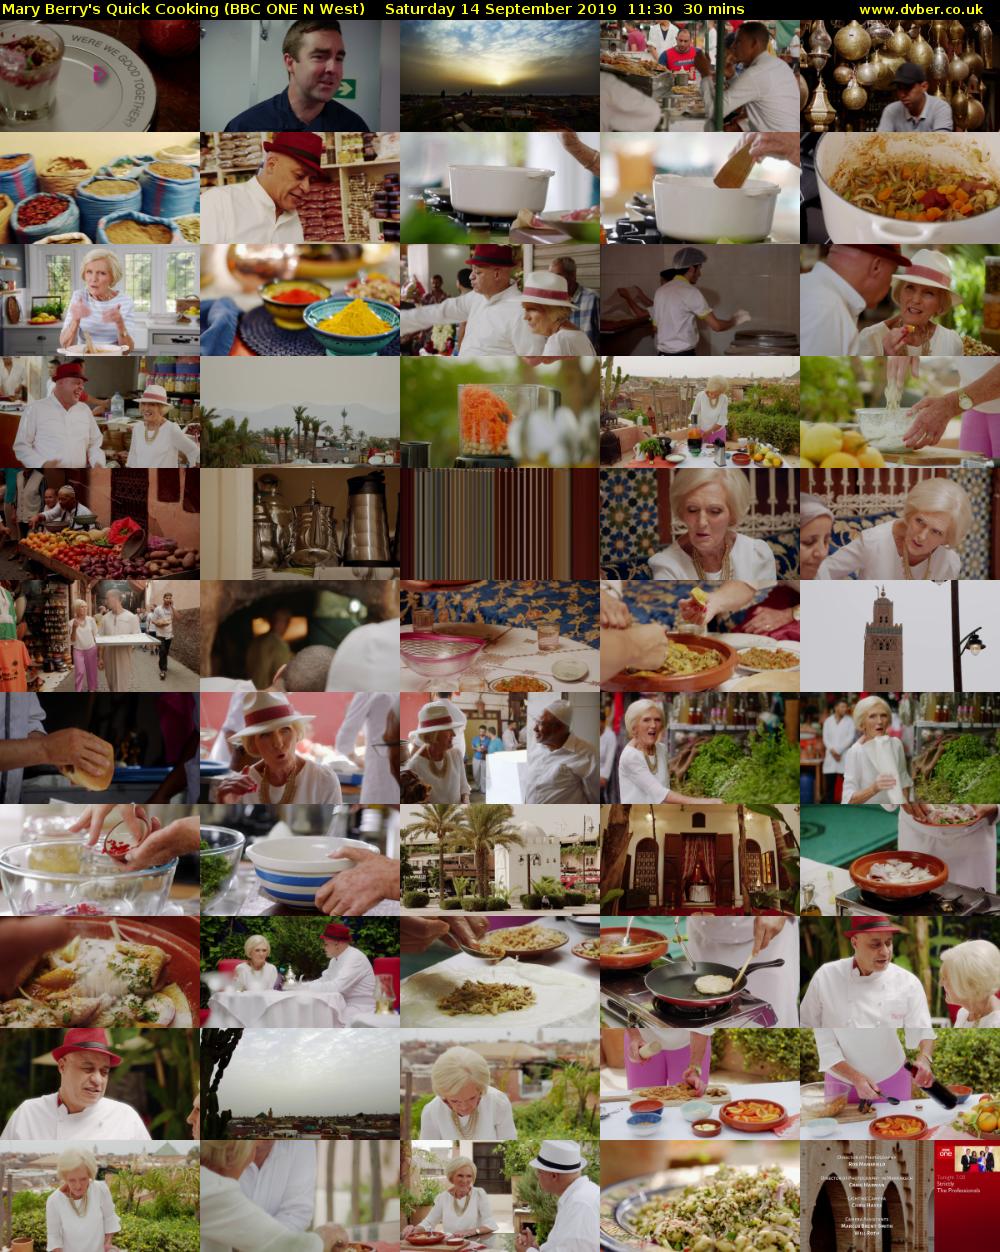 Mary Berry's Quick Cooking (BBC ONE N West) Saturday 14 September 2019 11:30 - 12:00